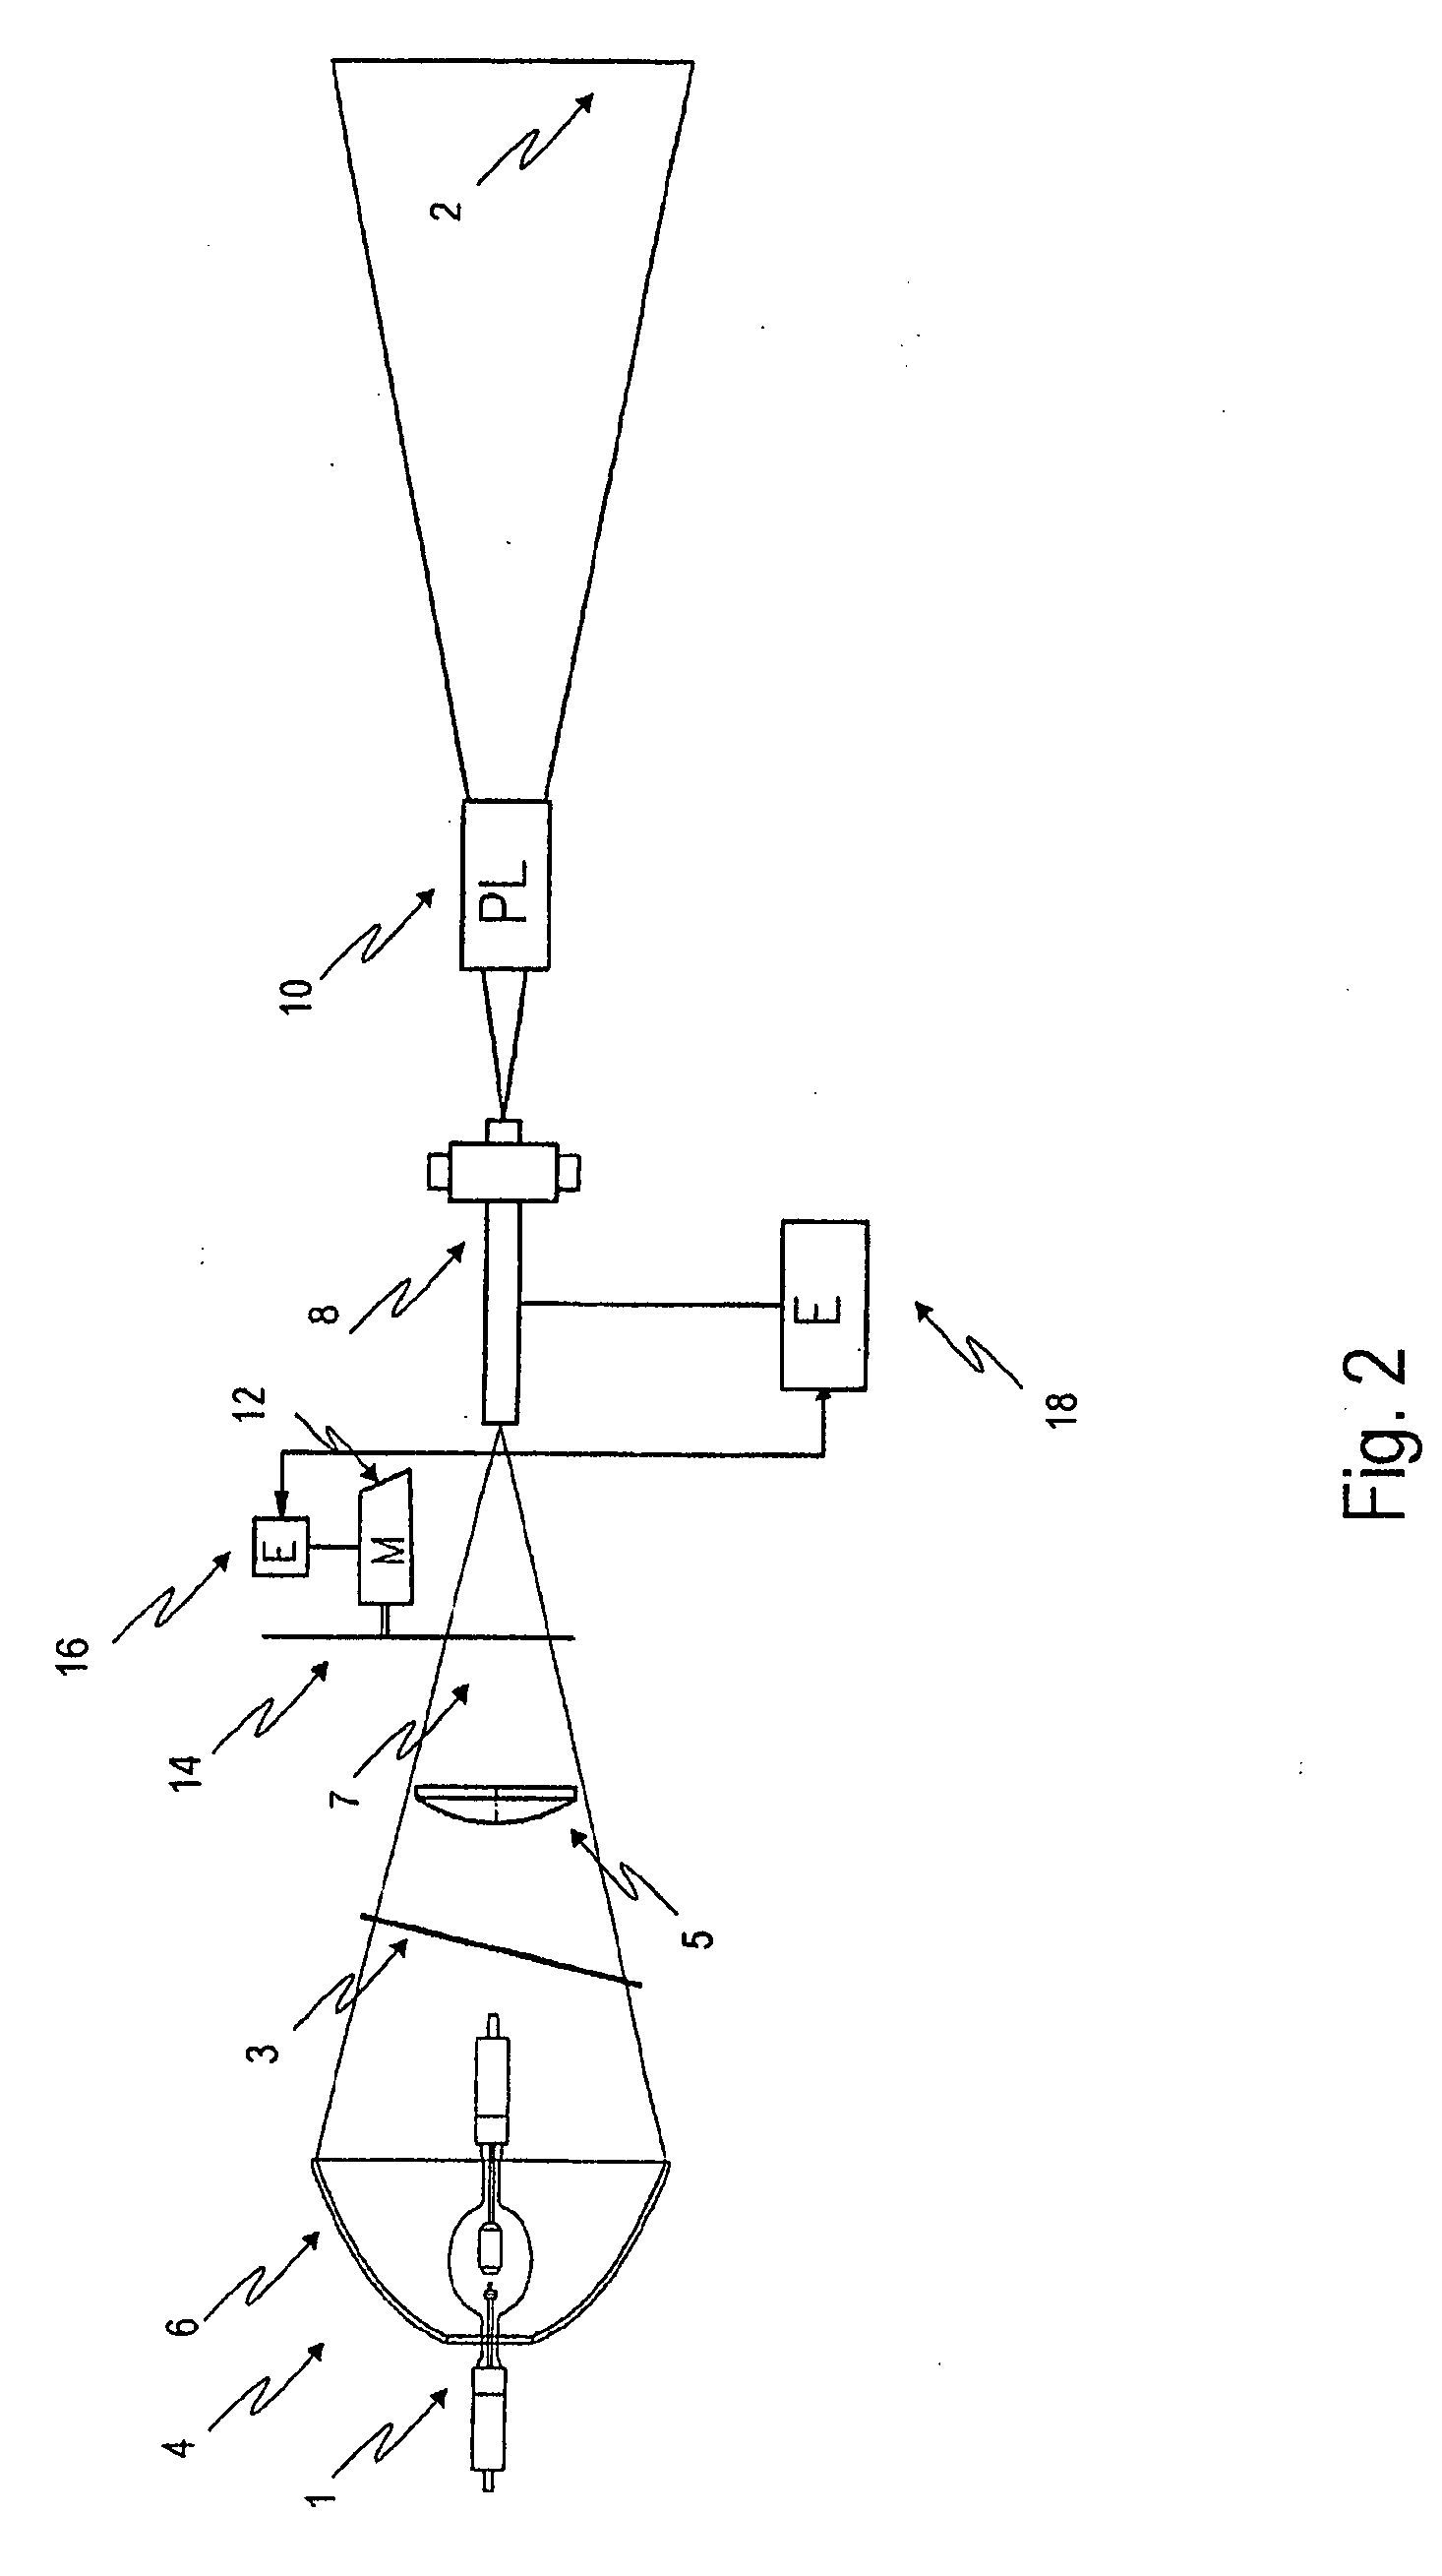 Device and method for large-screen projection of digital images onto a projection screen